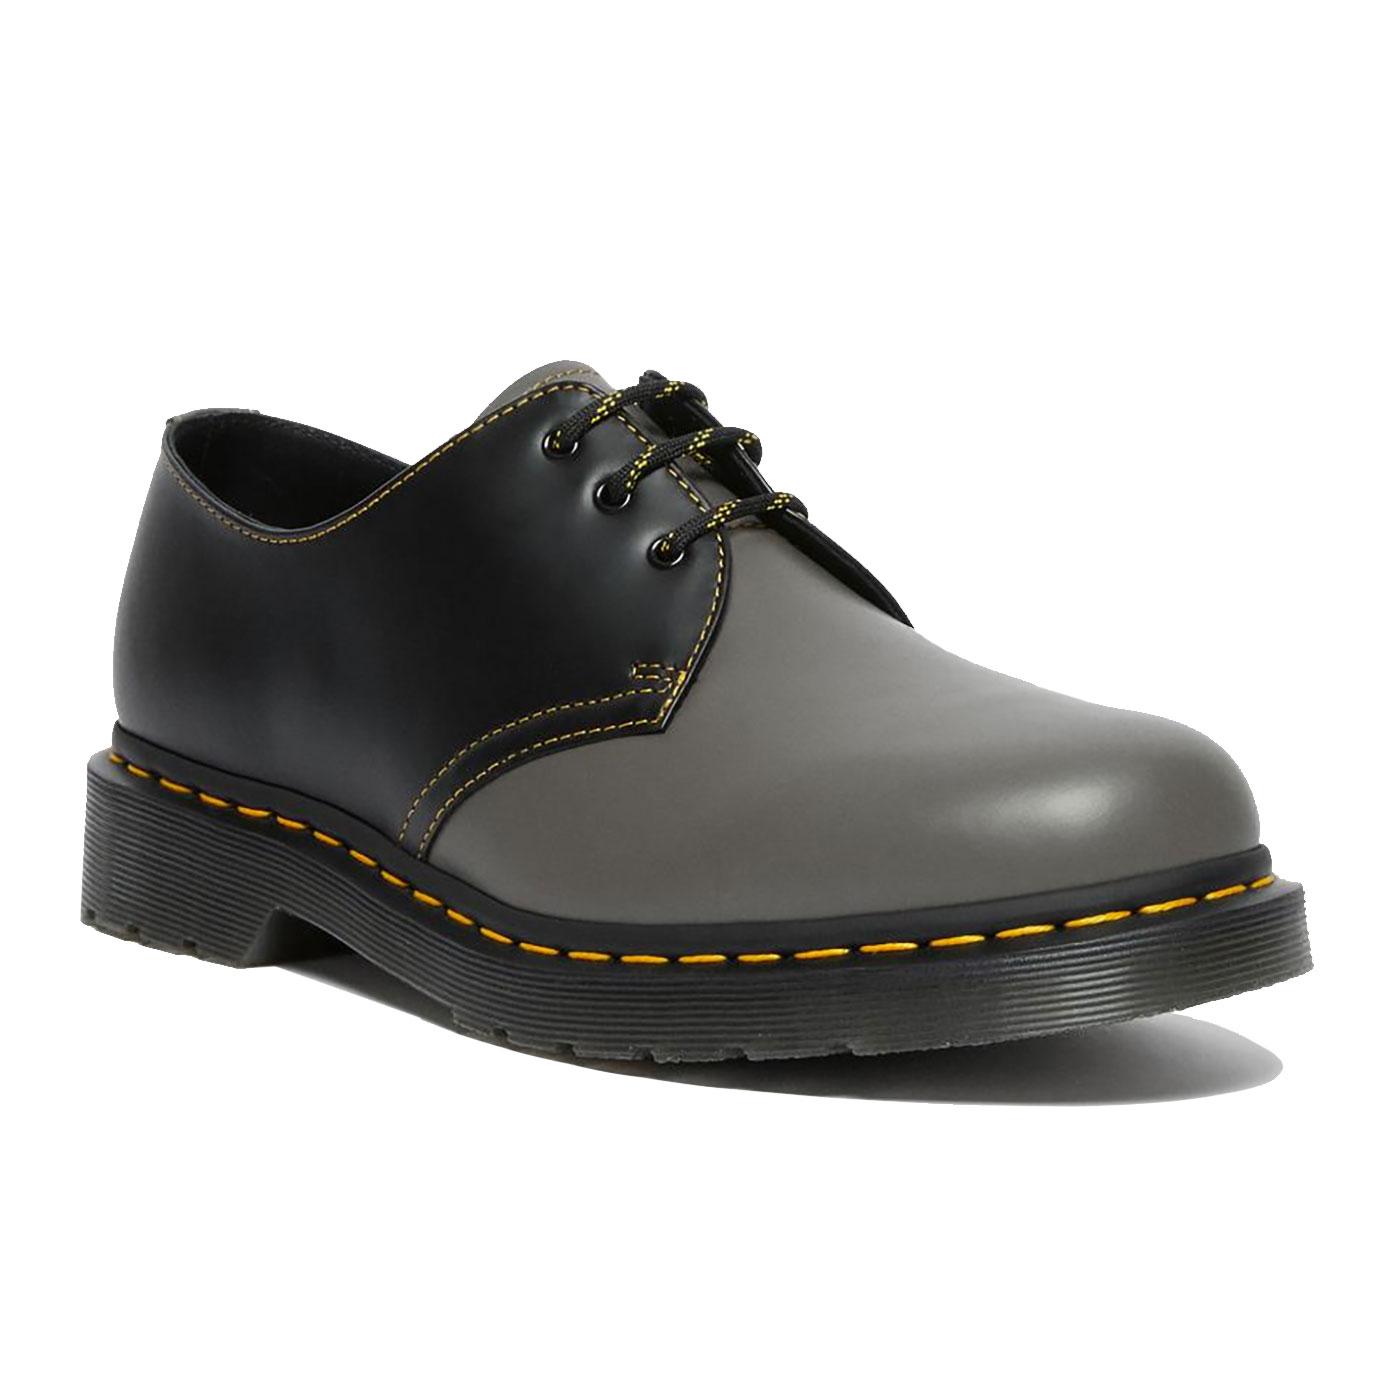 1461 DR MARTENS Contrast Smooth Leather Shoes C/B